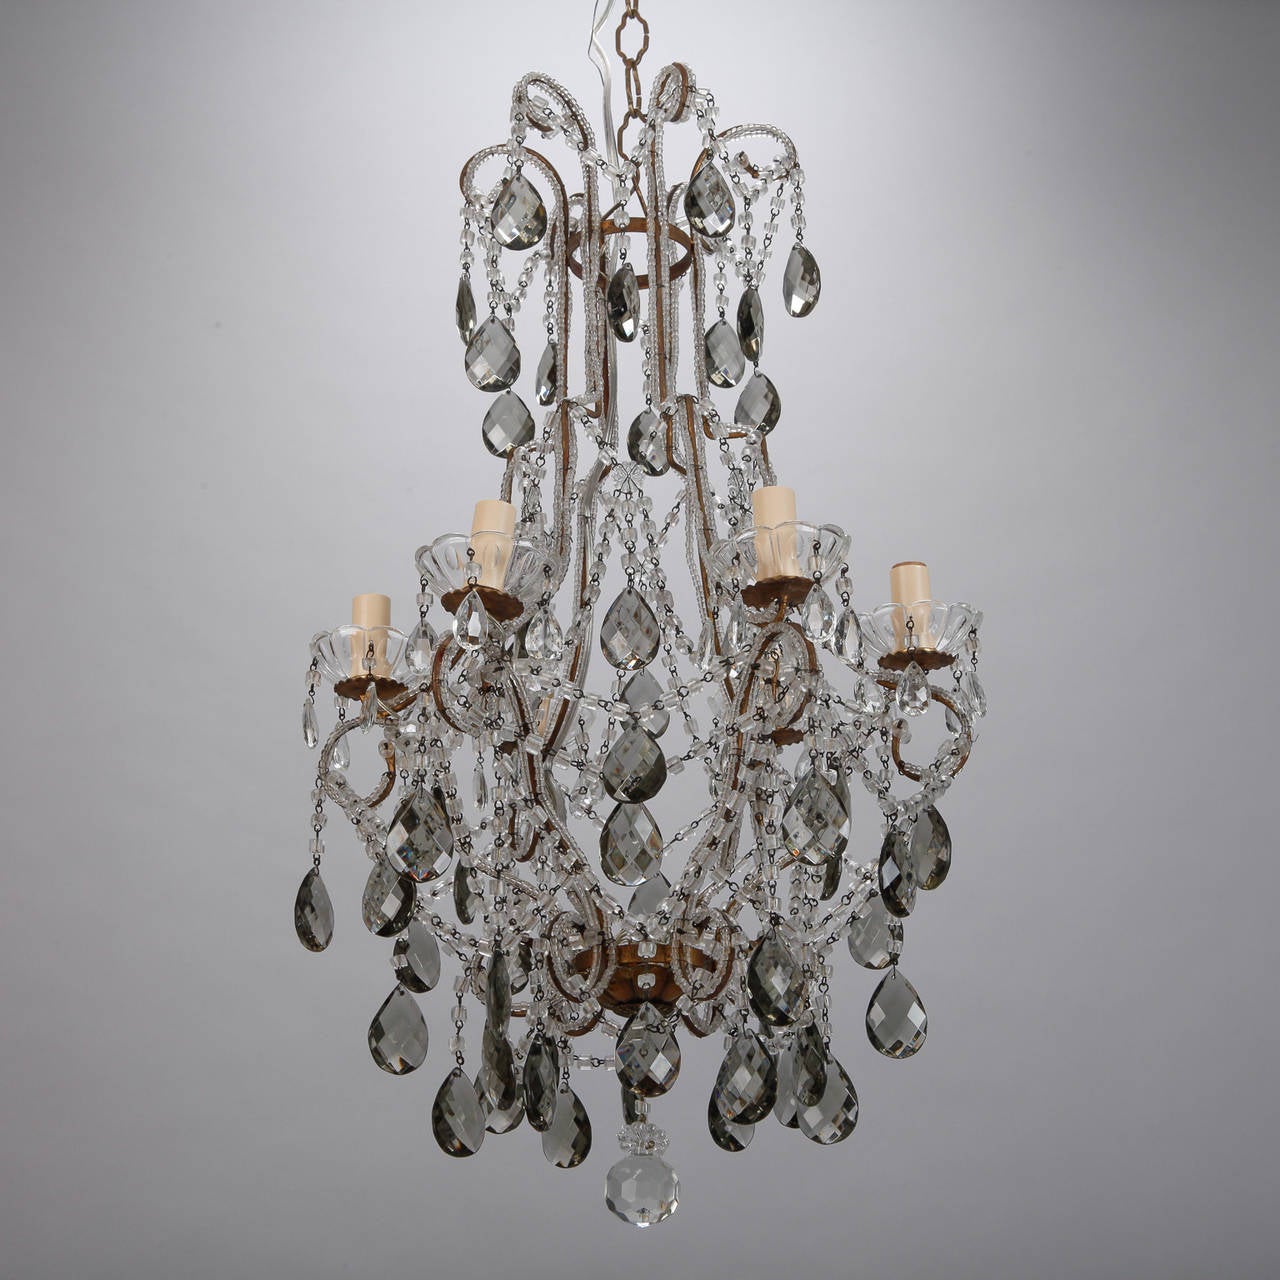 Early 20th Century French Six-Light All Crystal Beaded Chandelier with Smoke Color Drops